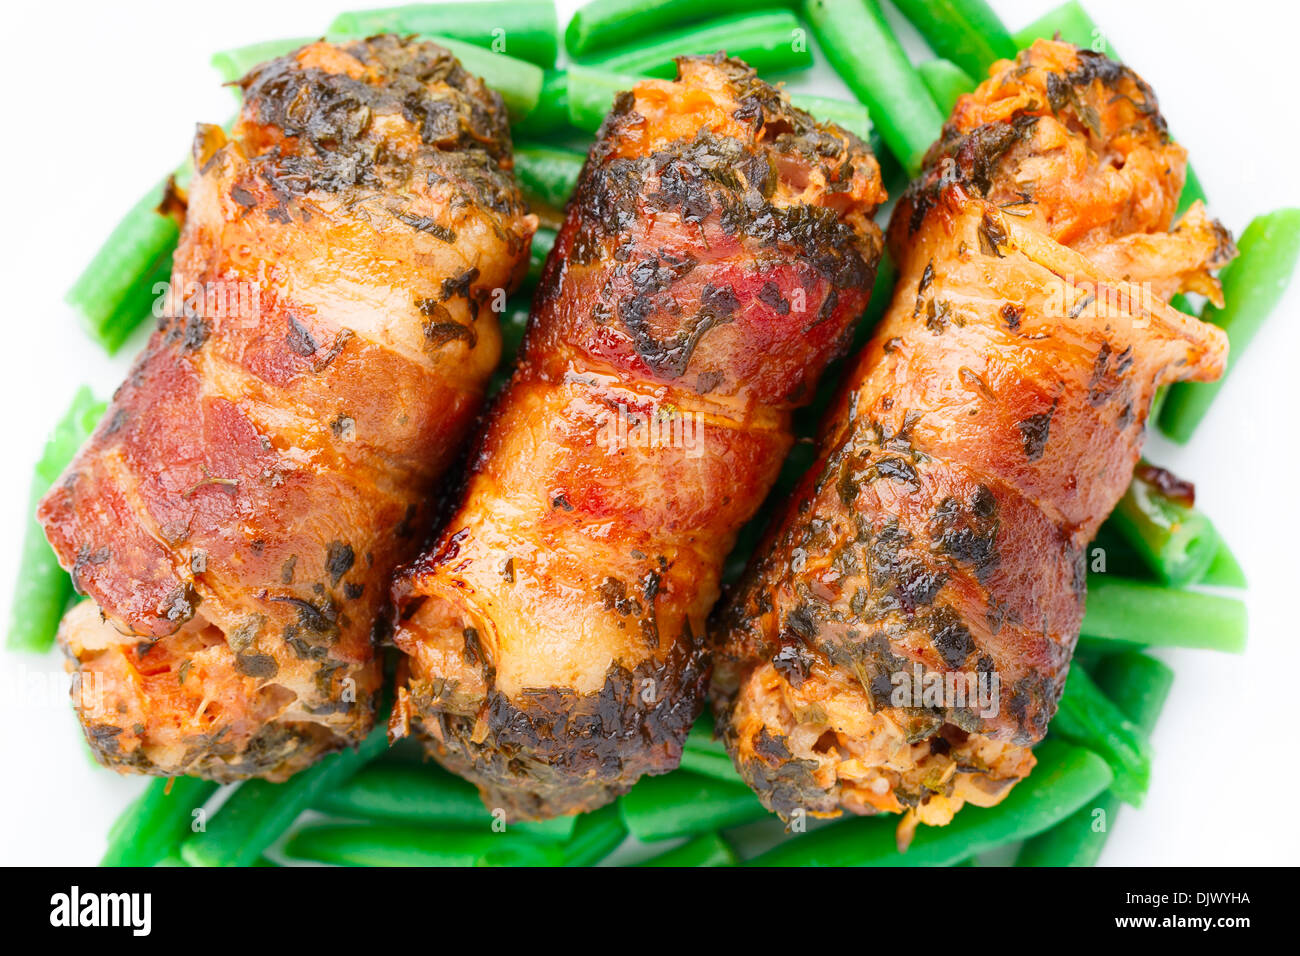 Bacon wrapped cutlet Stock Photo